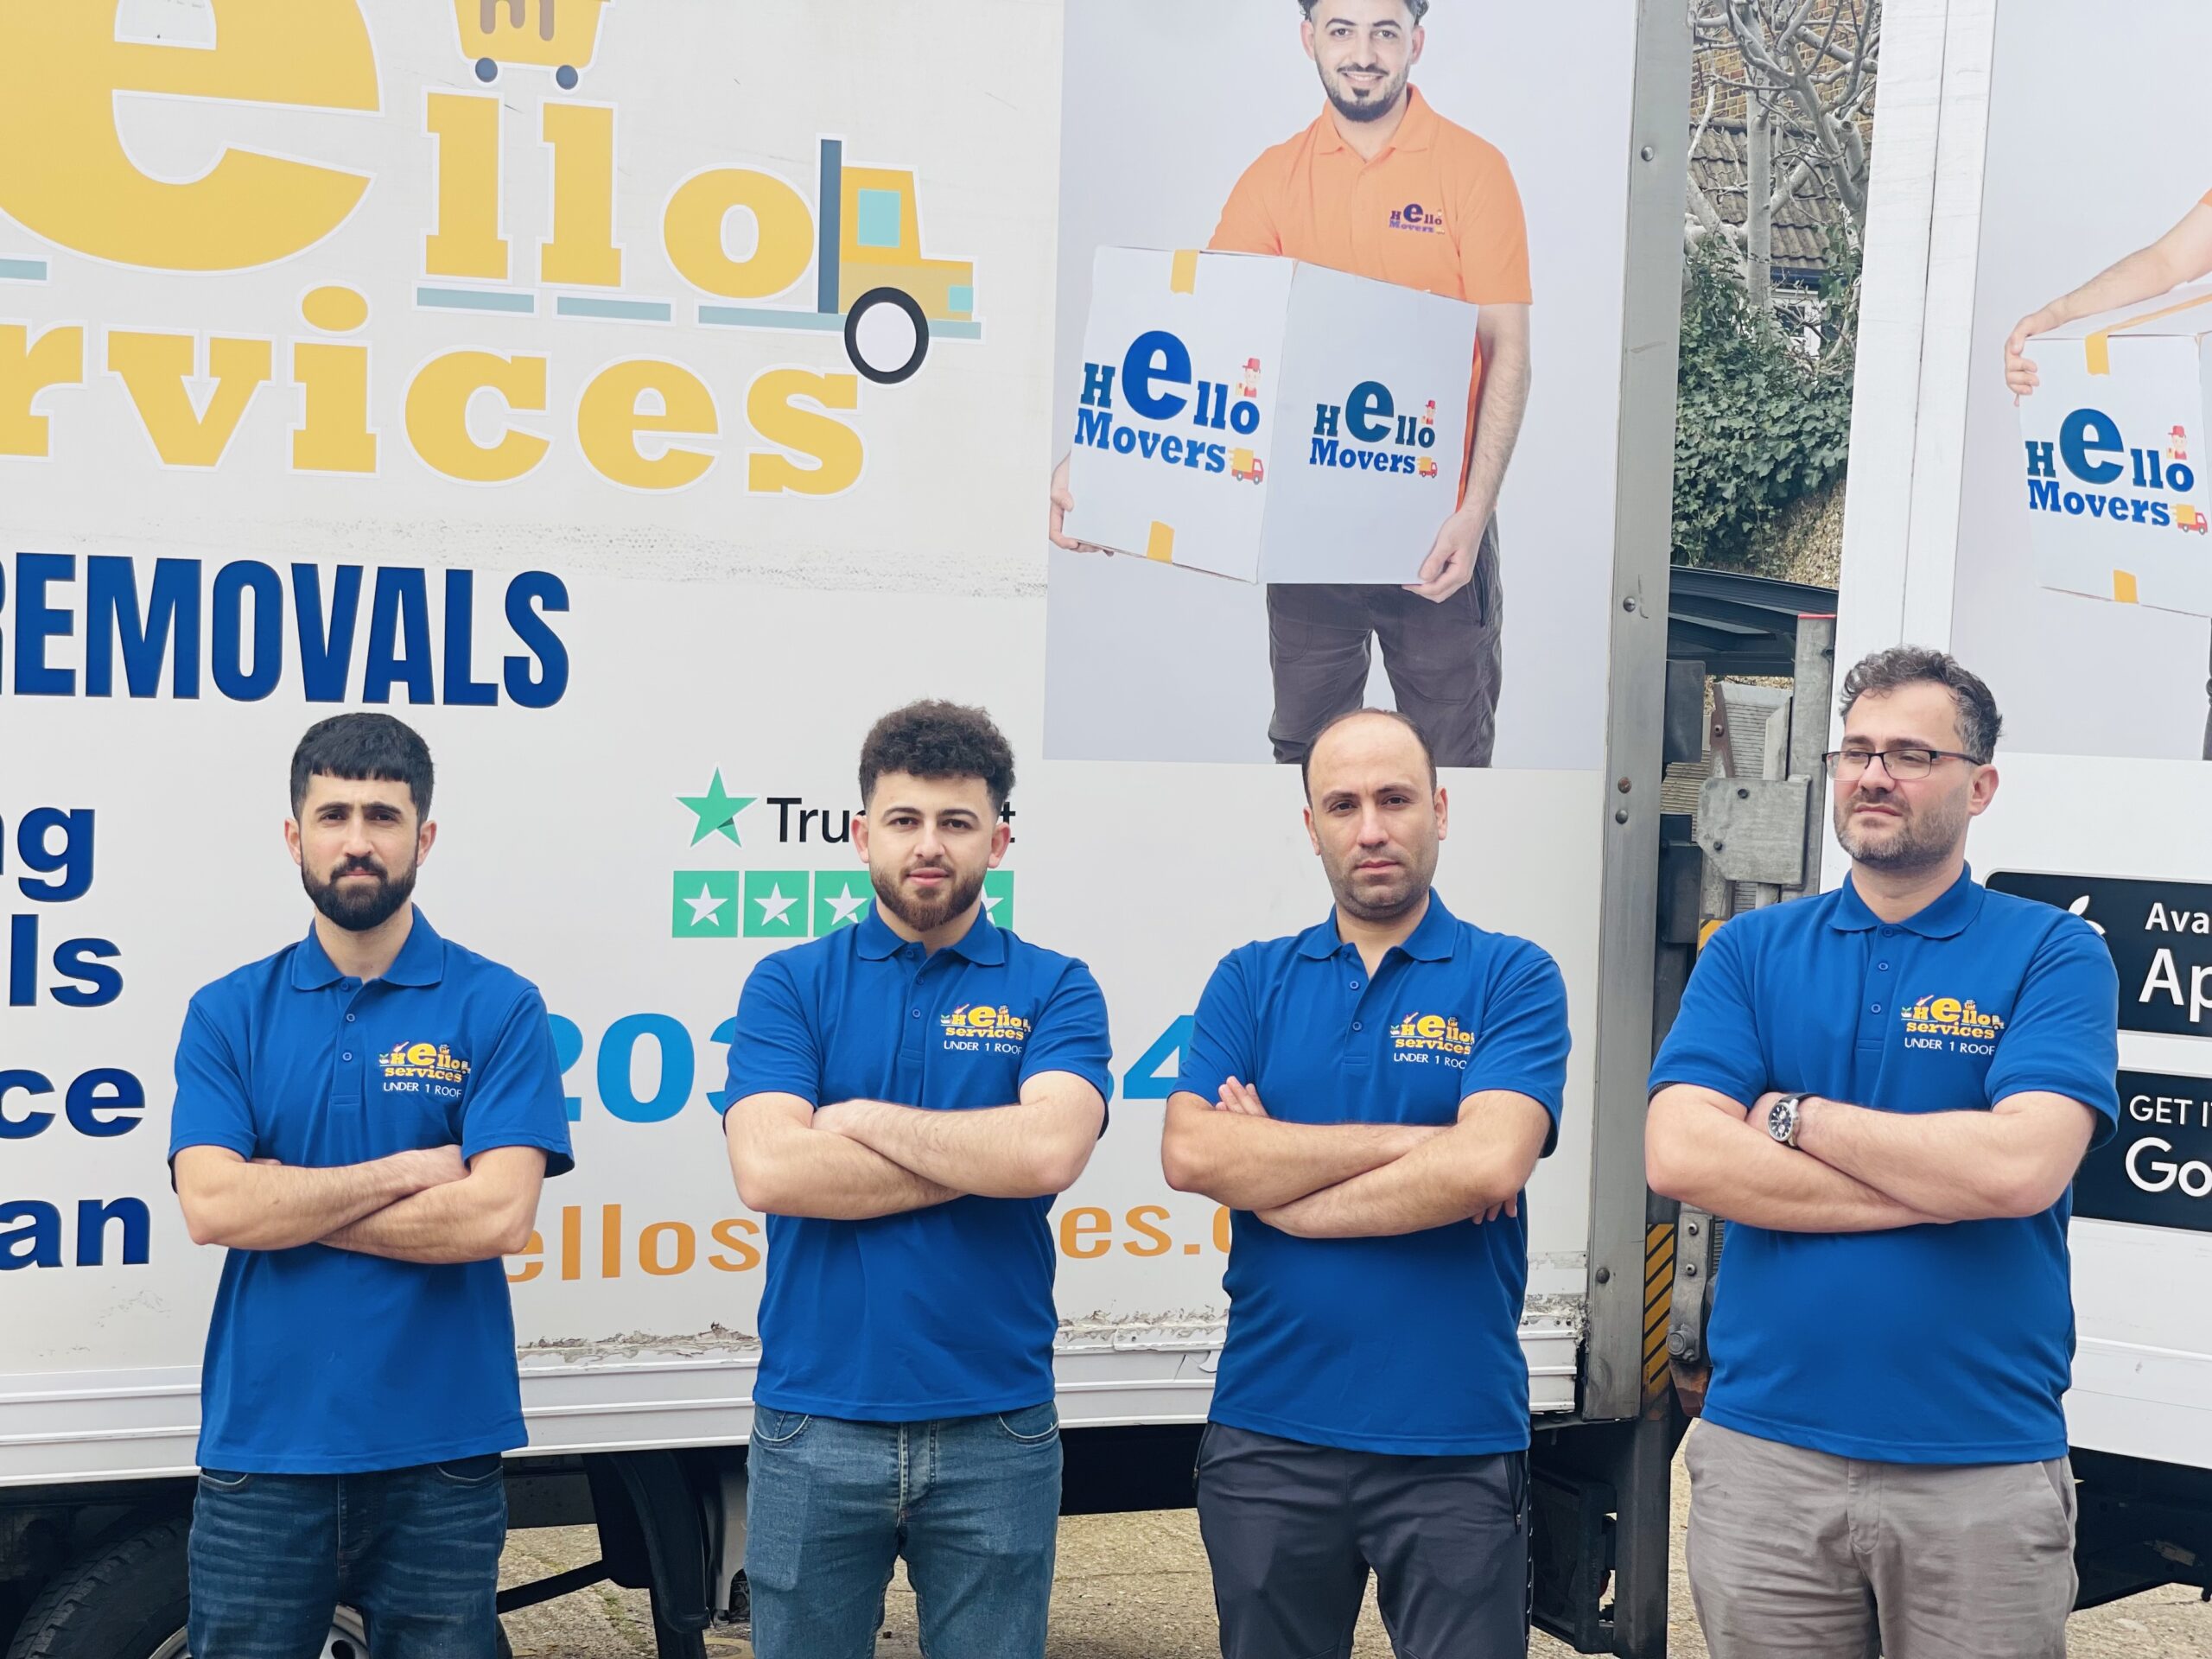 Removals or Man with Van: Which to Choose?